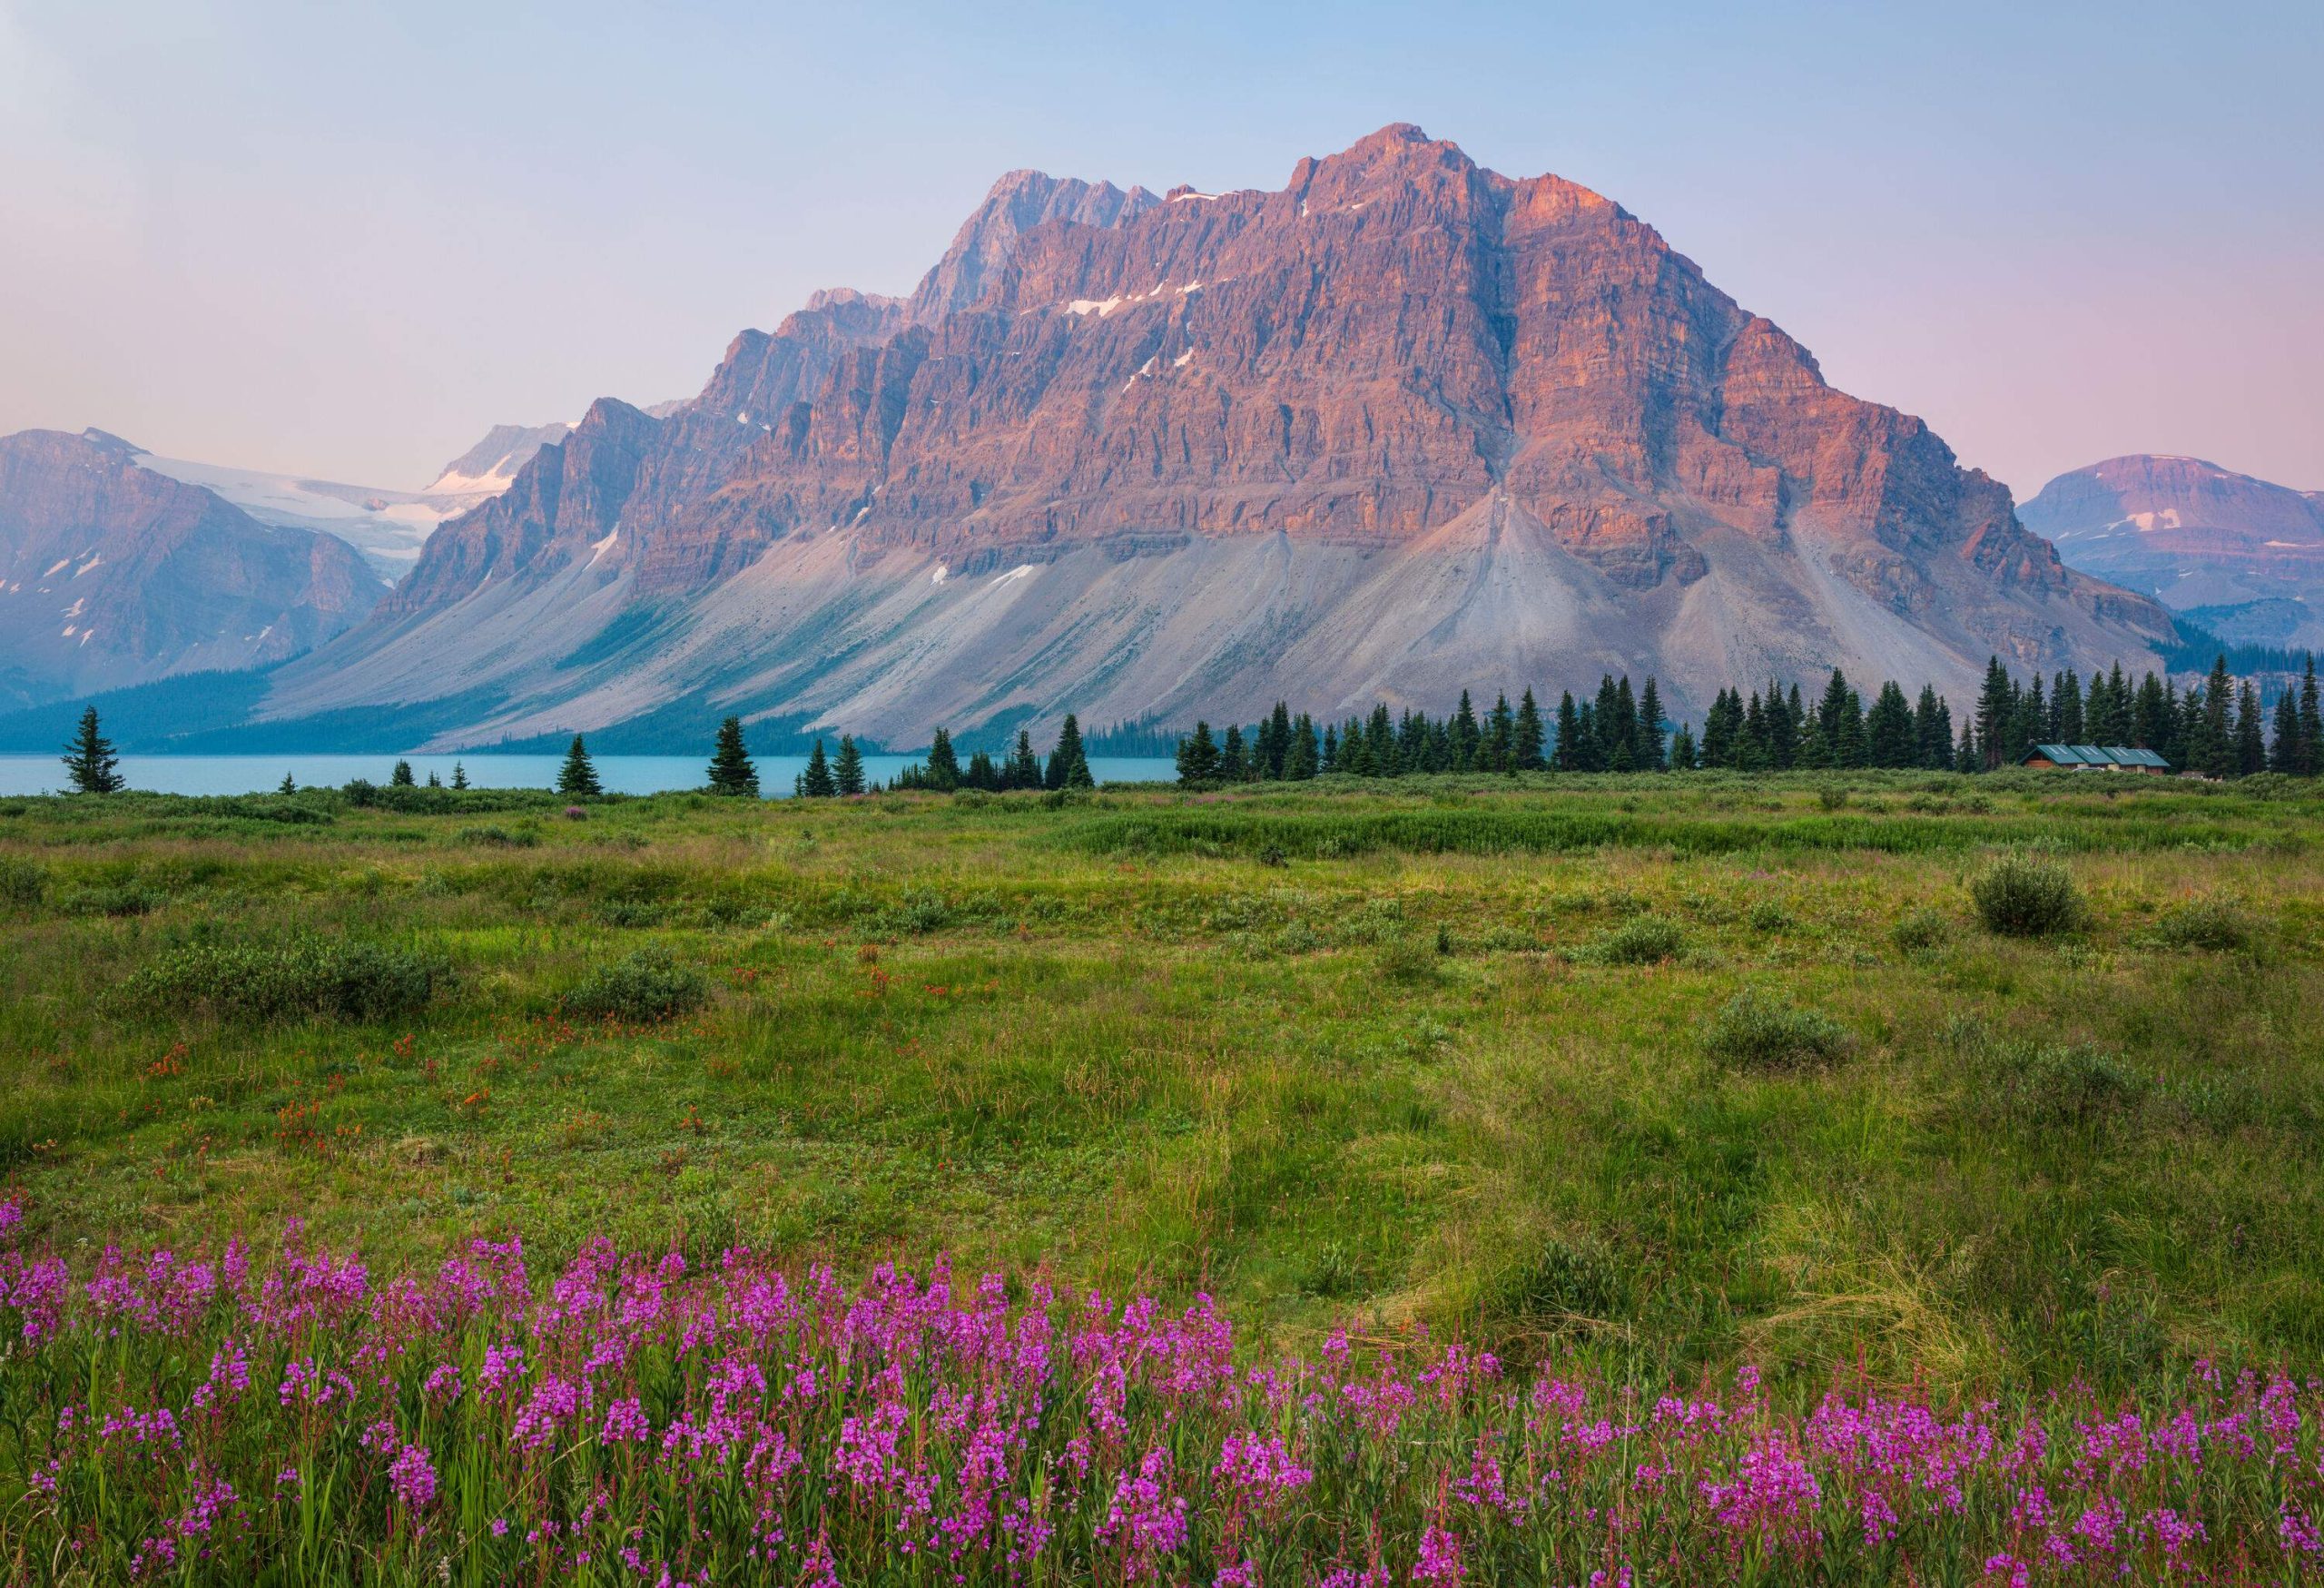 The landscape of lush land with a row of violet blossoms and the rocky mountain range.